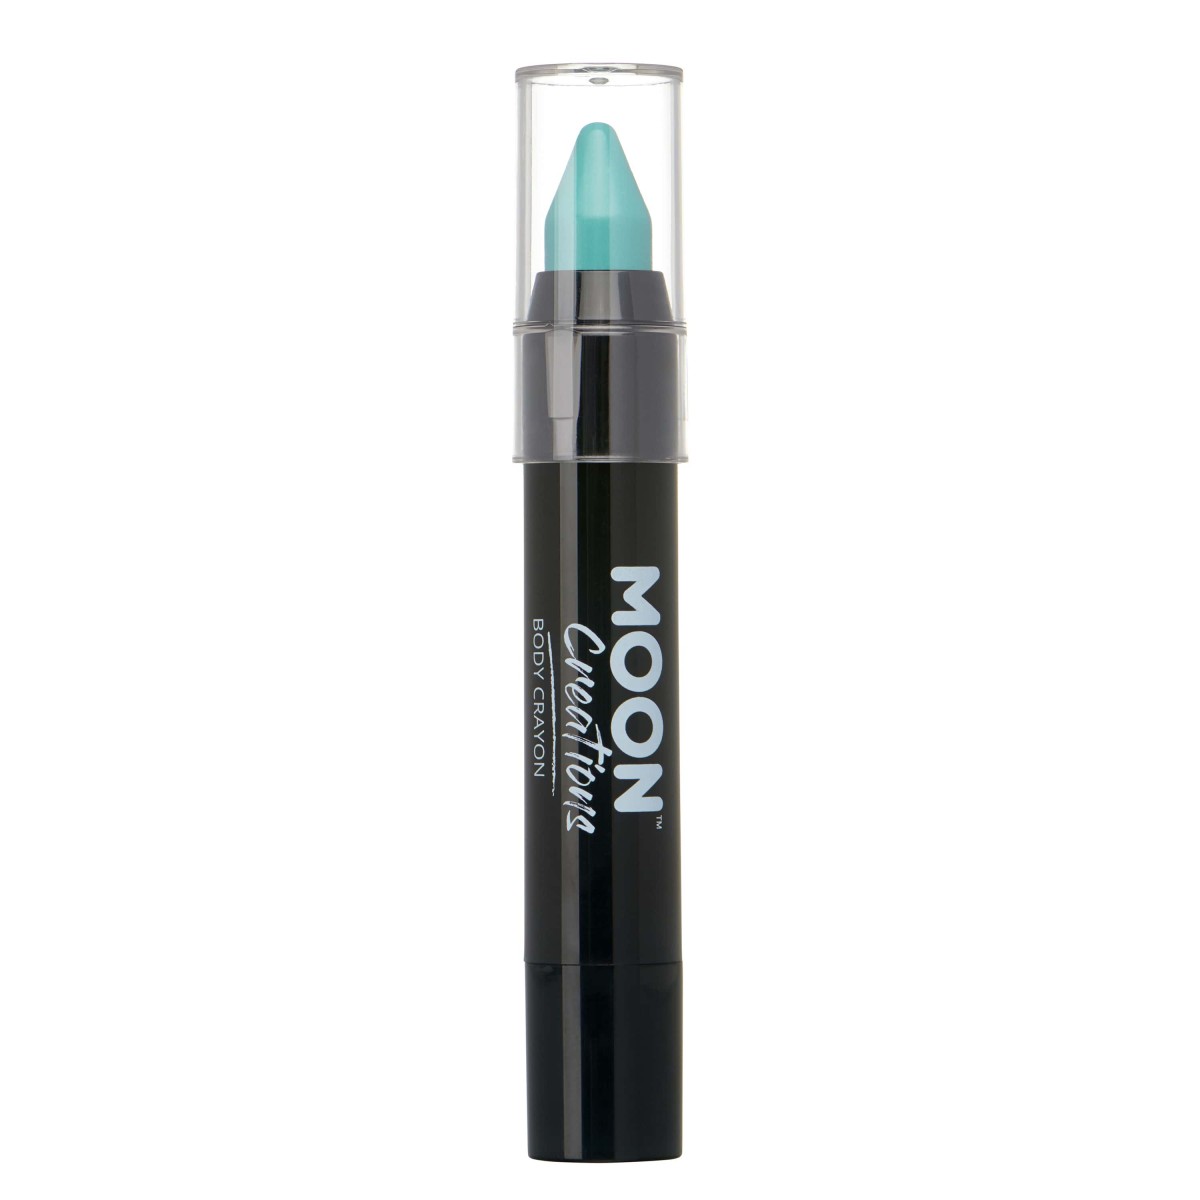 MOON CREATIONS C3 FACE & BODY CRAYON TURQUOISE 3.2g